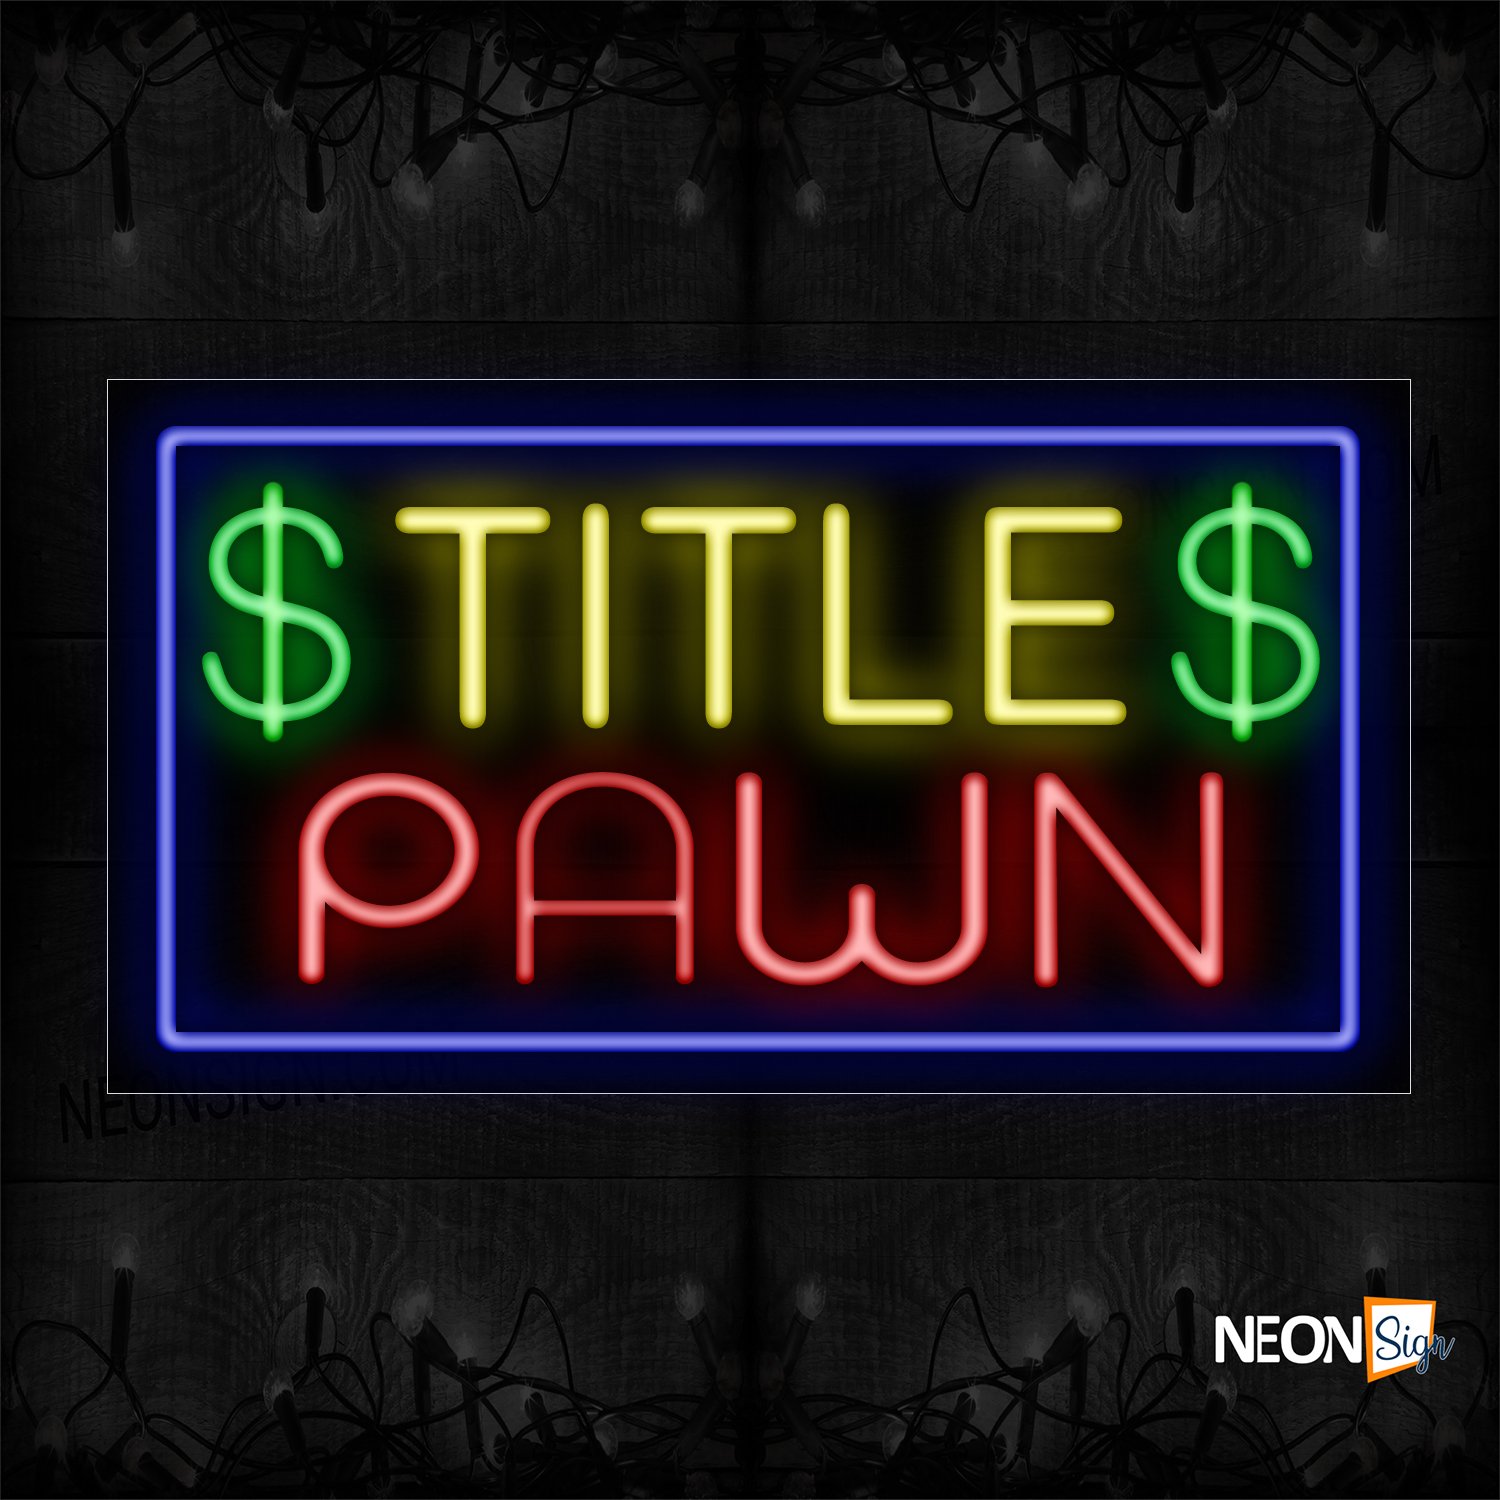 Image of 11308 $ Title $ Pawn With Blue Border Neon Sign_20x37 Black Backing